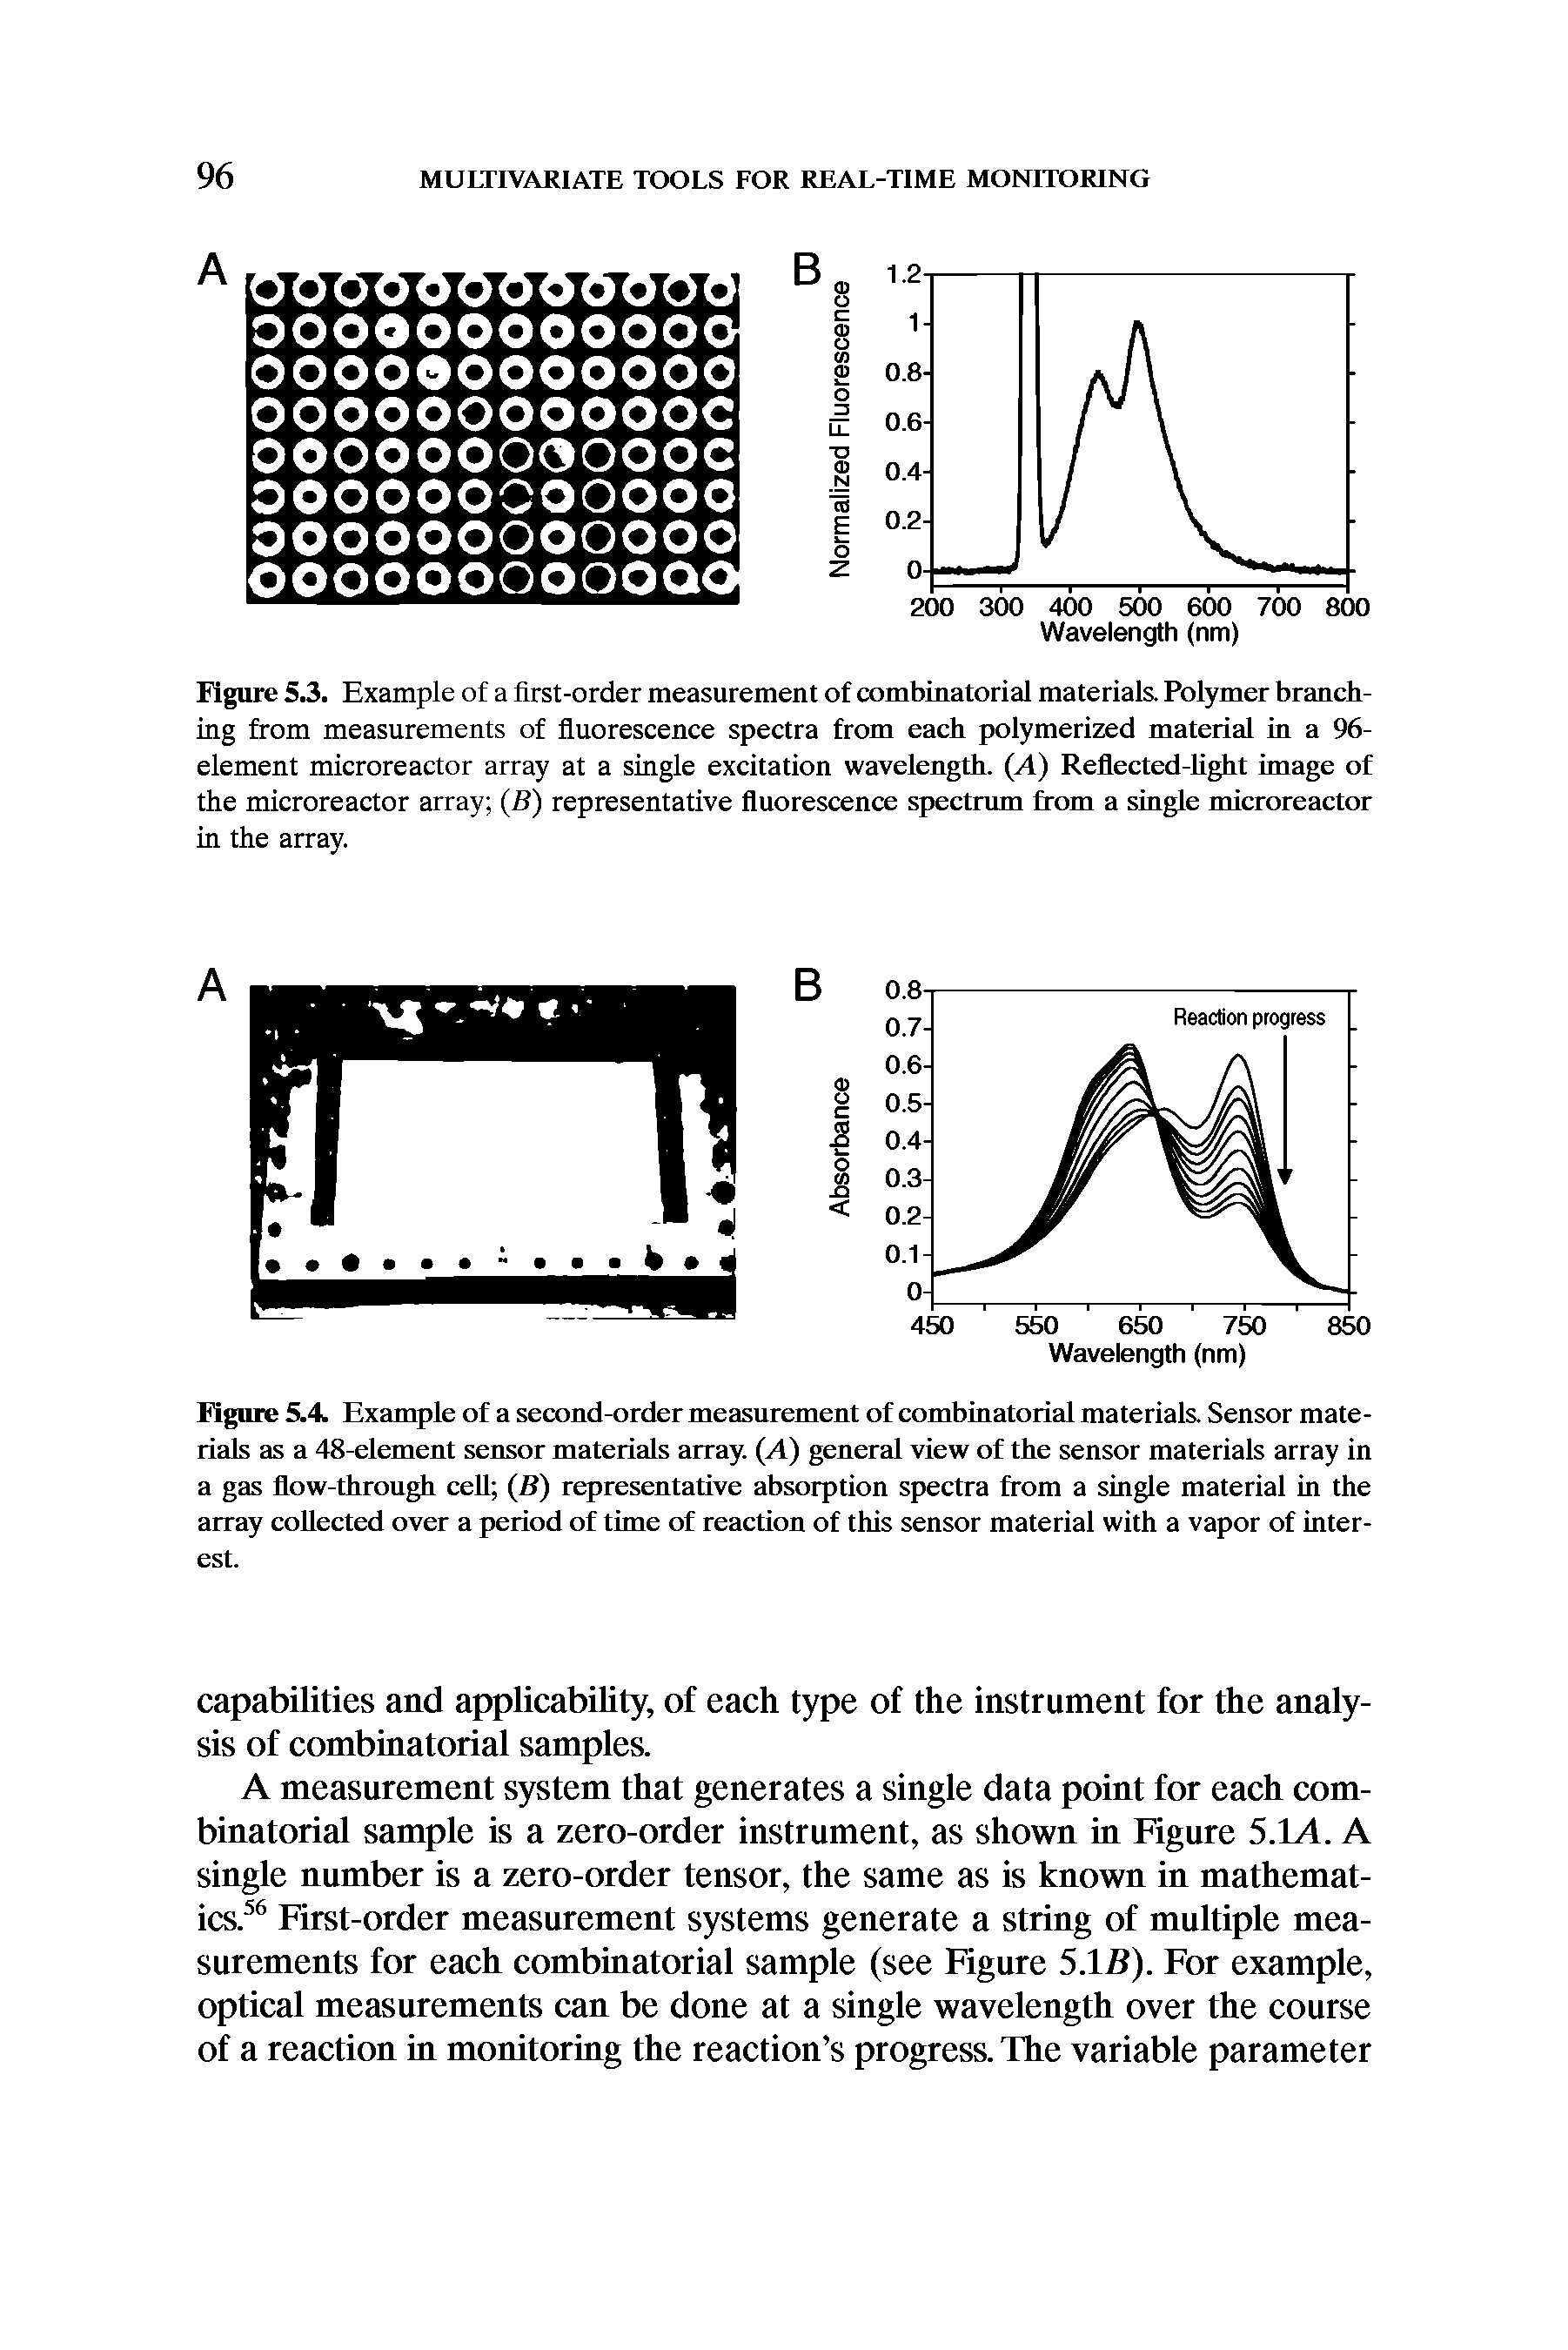 Figure S.3. Example of a first-order measurement of combinatorial materials. Polymer branching from measurements of fluorescence spectra from each polymerized material in a 96-element microreactor array at a single excitation wavelength. (A) Reflected-hght image of the microreactor array (B) representative fluorescence spectrum from a single microreactor in the array.